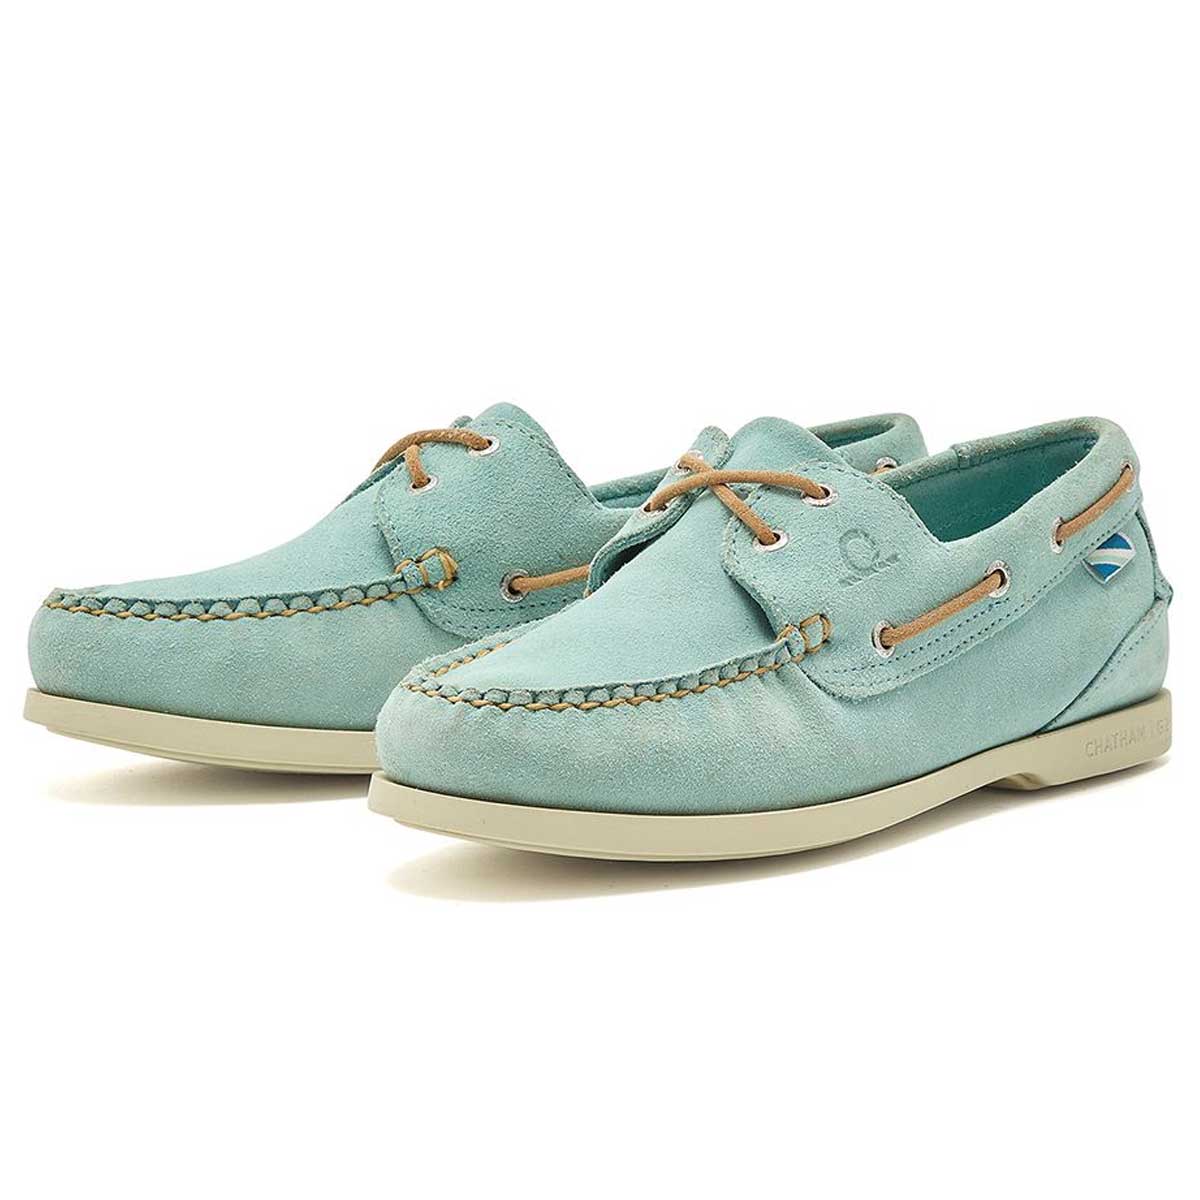 CHATHAM Pippa II G2 Repello Boat Shoes - Women's - Pale Jade Suede